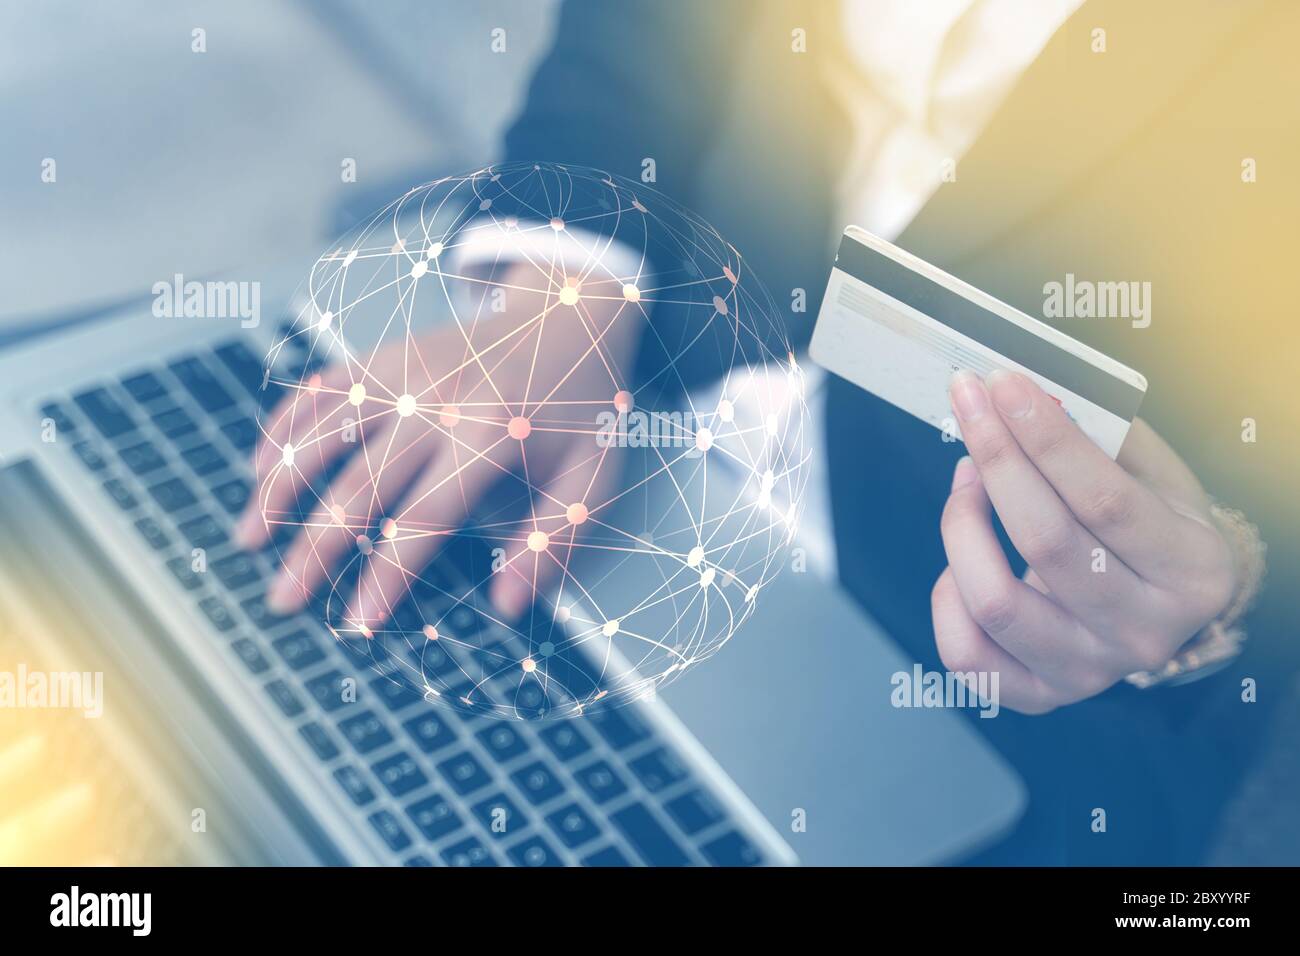 internet banking network. Business people using a laptop computer with icon application online payment Stock Photo